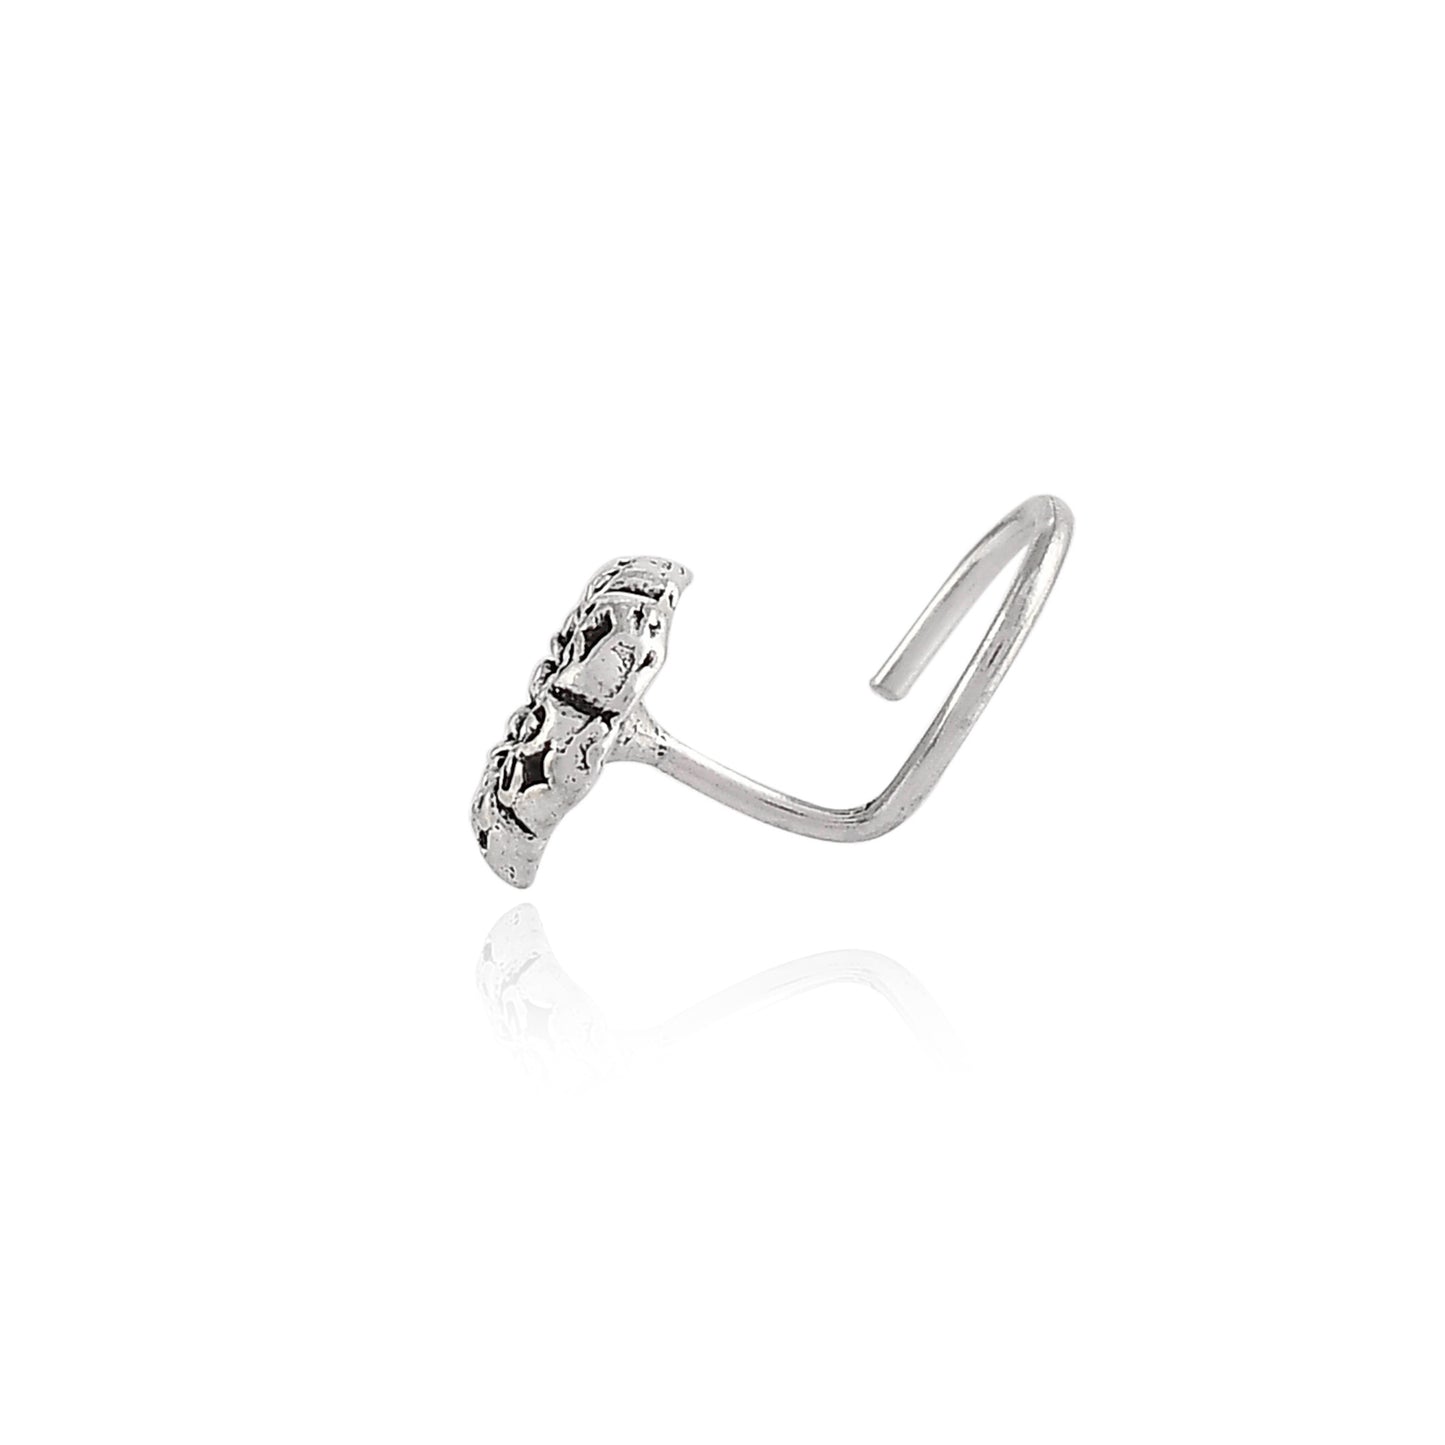 Sterling Silver 925 Oxidized Nose Pin